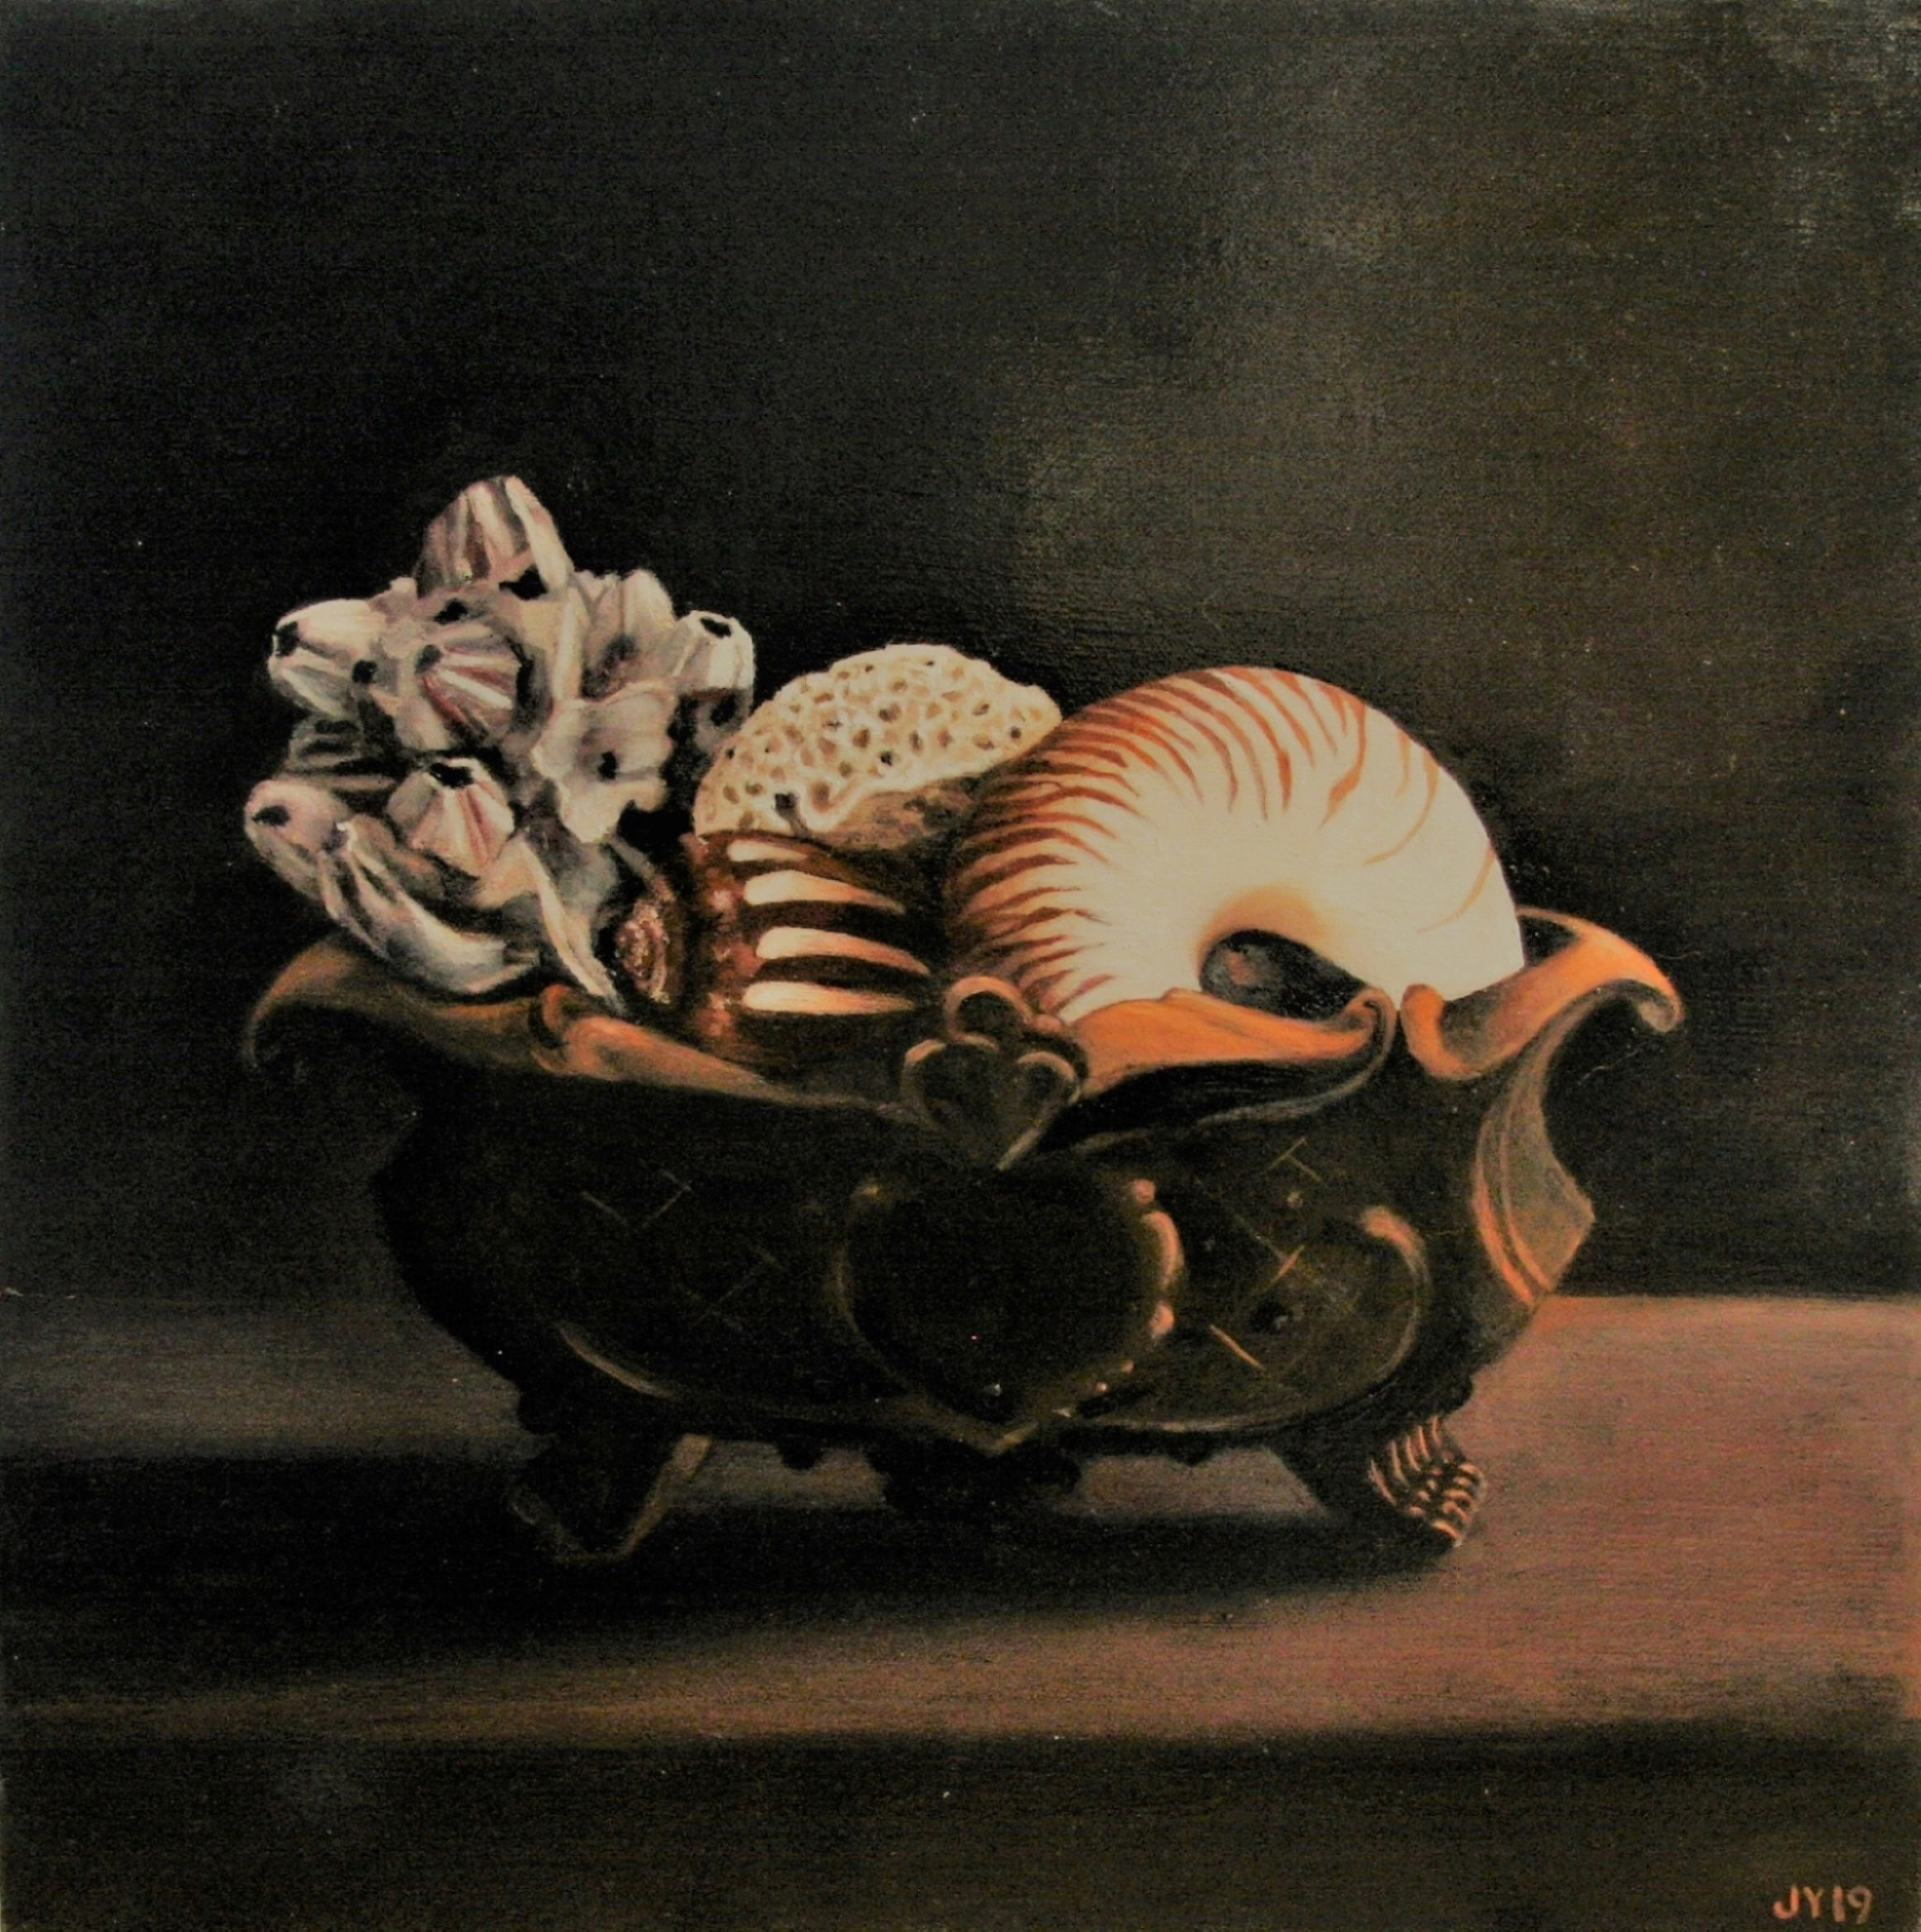 Young Still Life Cast Iron Shell 40 cm x 40 cm Oil on Linen